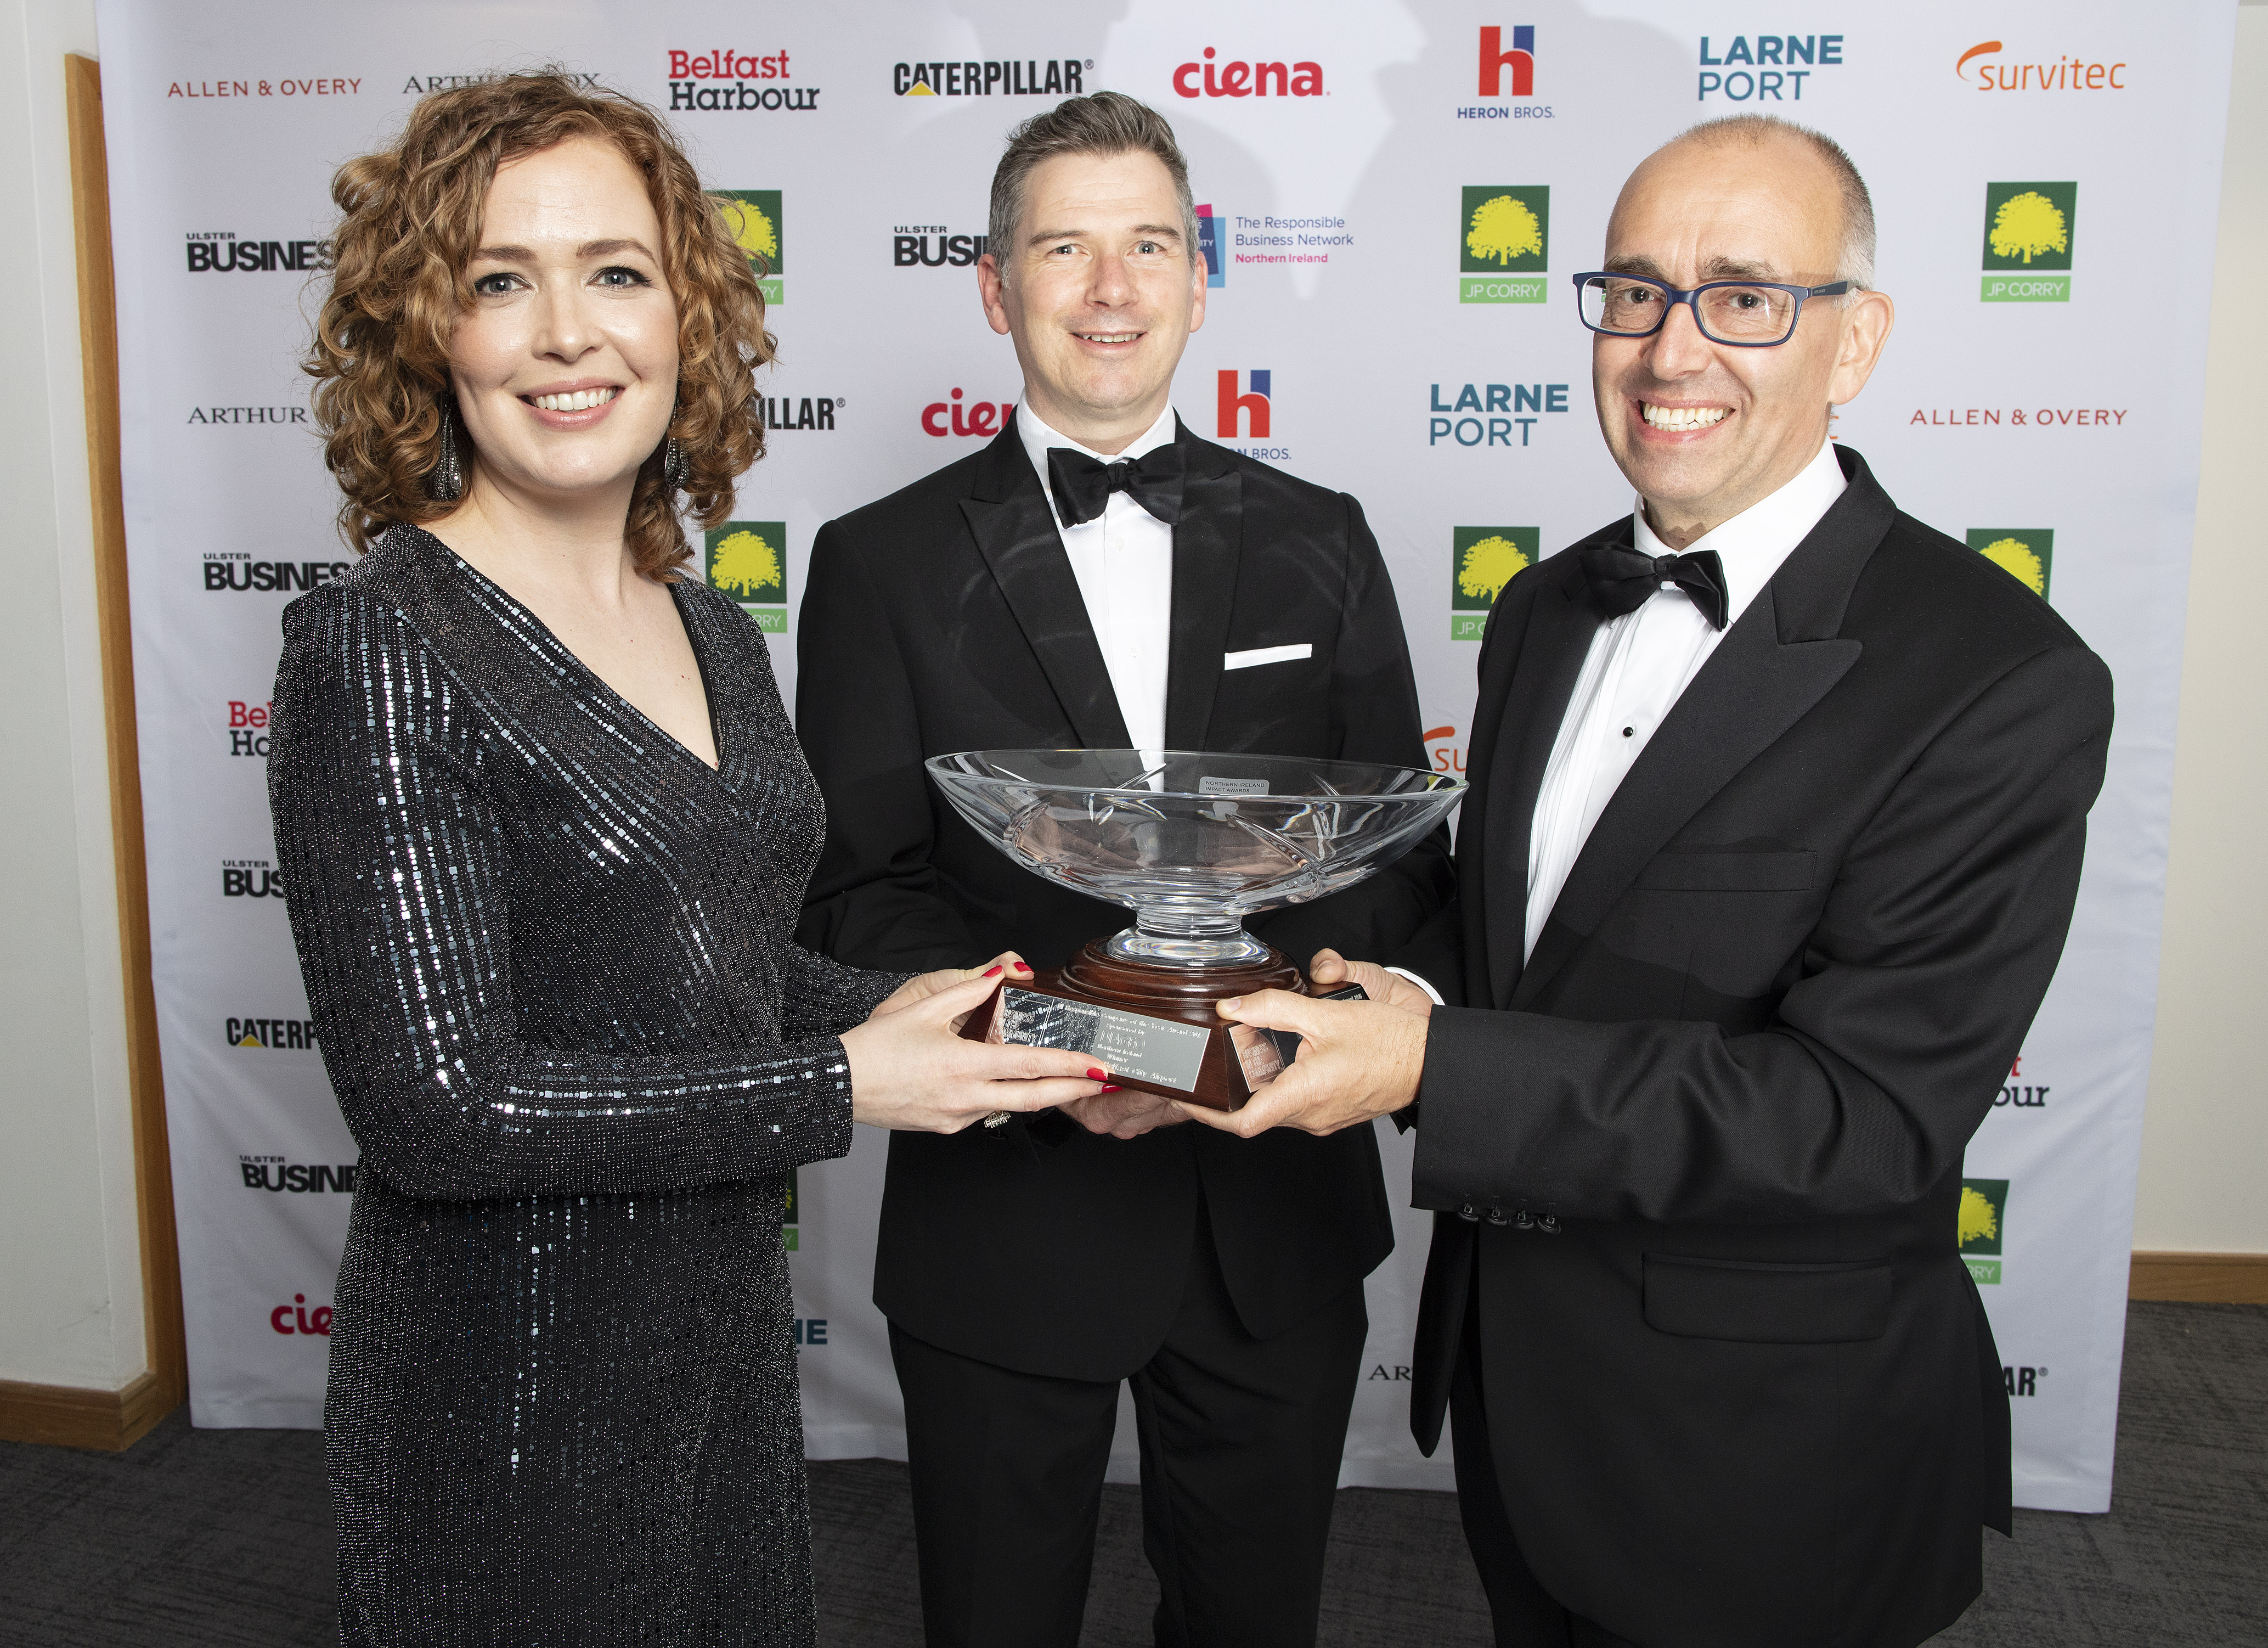 Three people stand at an awards ceremony, all very smartly dressed, they are holding an award - a big commemorative glass bowl.. There is a media backdrop with lots of logos behind them. 